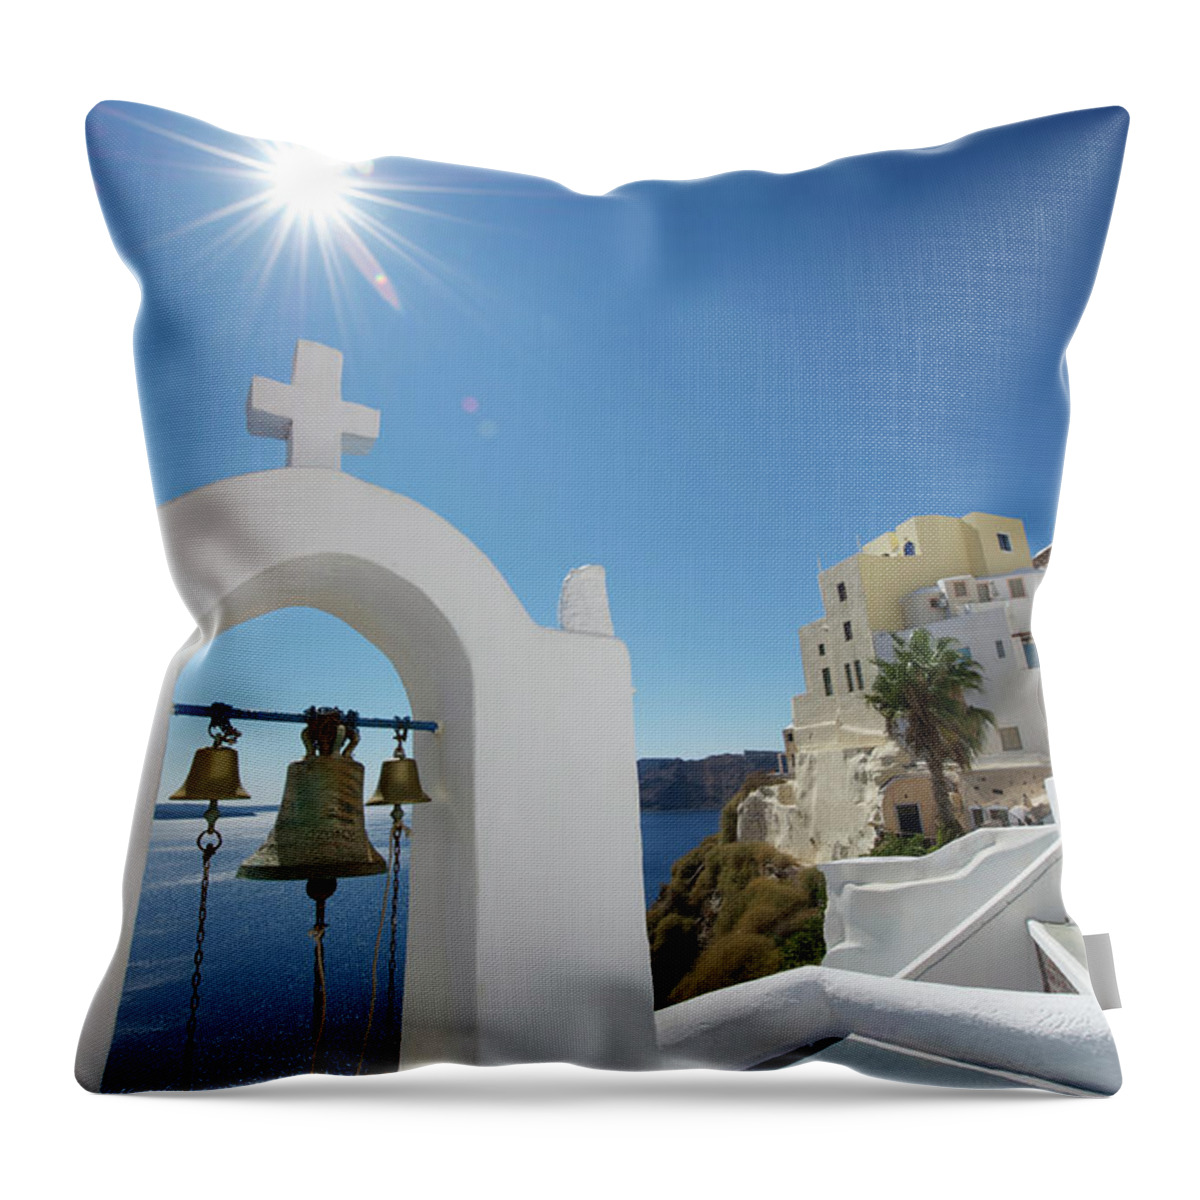 Scenics Throw Pillow featuring the photograph Bright Bell Tower Santorini Greece by Peskymonkey